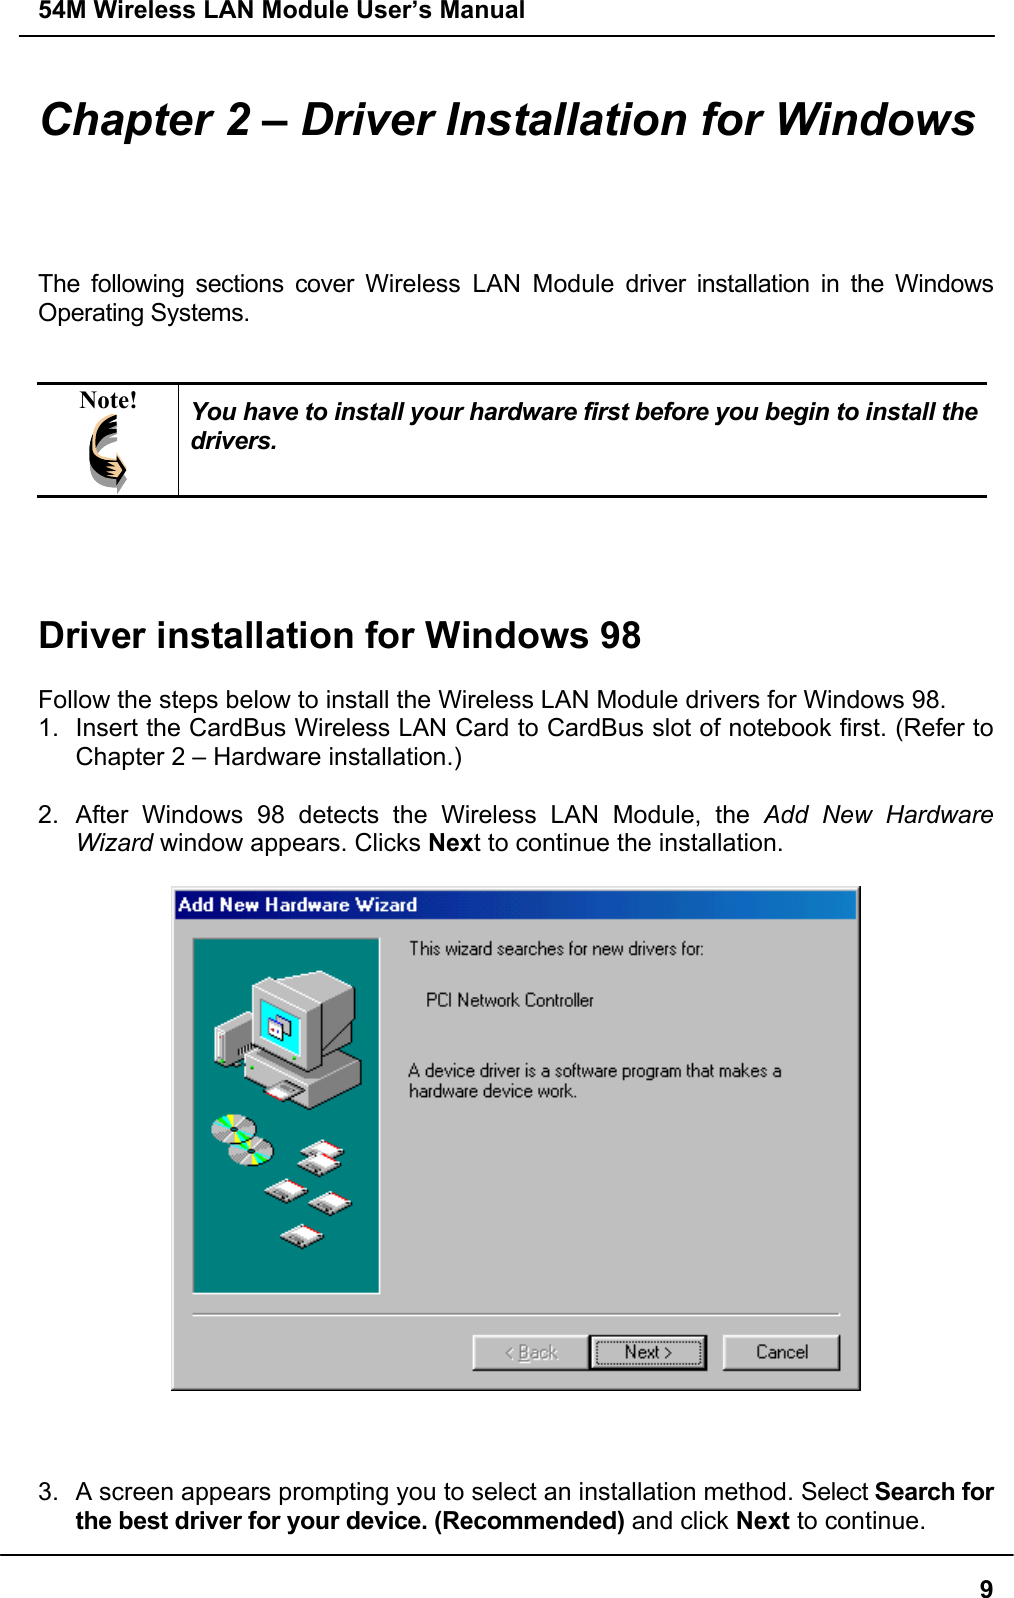 54M Wireless LAN Module User’s Manual9Chapter 2 – Driver Installation for WindowsThe following sections cover Wireless LAN Module driver installation in the WindowsOperating Systems.Note! You have to install your hardware first before you begin to install thedrivers.Driver installation for Windows 98Follow the steps below to install the Wireless LAN Module drivers for Windows 98.1.  Insert the CardBus Wireless LAN Card to CardBus slot of notebook first. (Refer toChapter 2 – Hardware installation.)2.  After Windows 98 detects the Wireless LAN Module, the Add New HardwareWizard window appears. Clicks Next to continue the installation.3.  A screen appears prompting you to select an installation method. Select Search forthe best driver for your device. (Recommended) and click Next to continue.